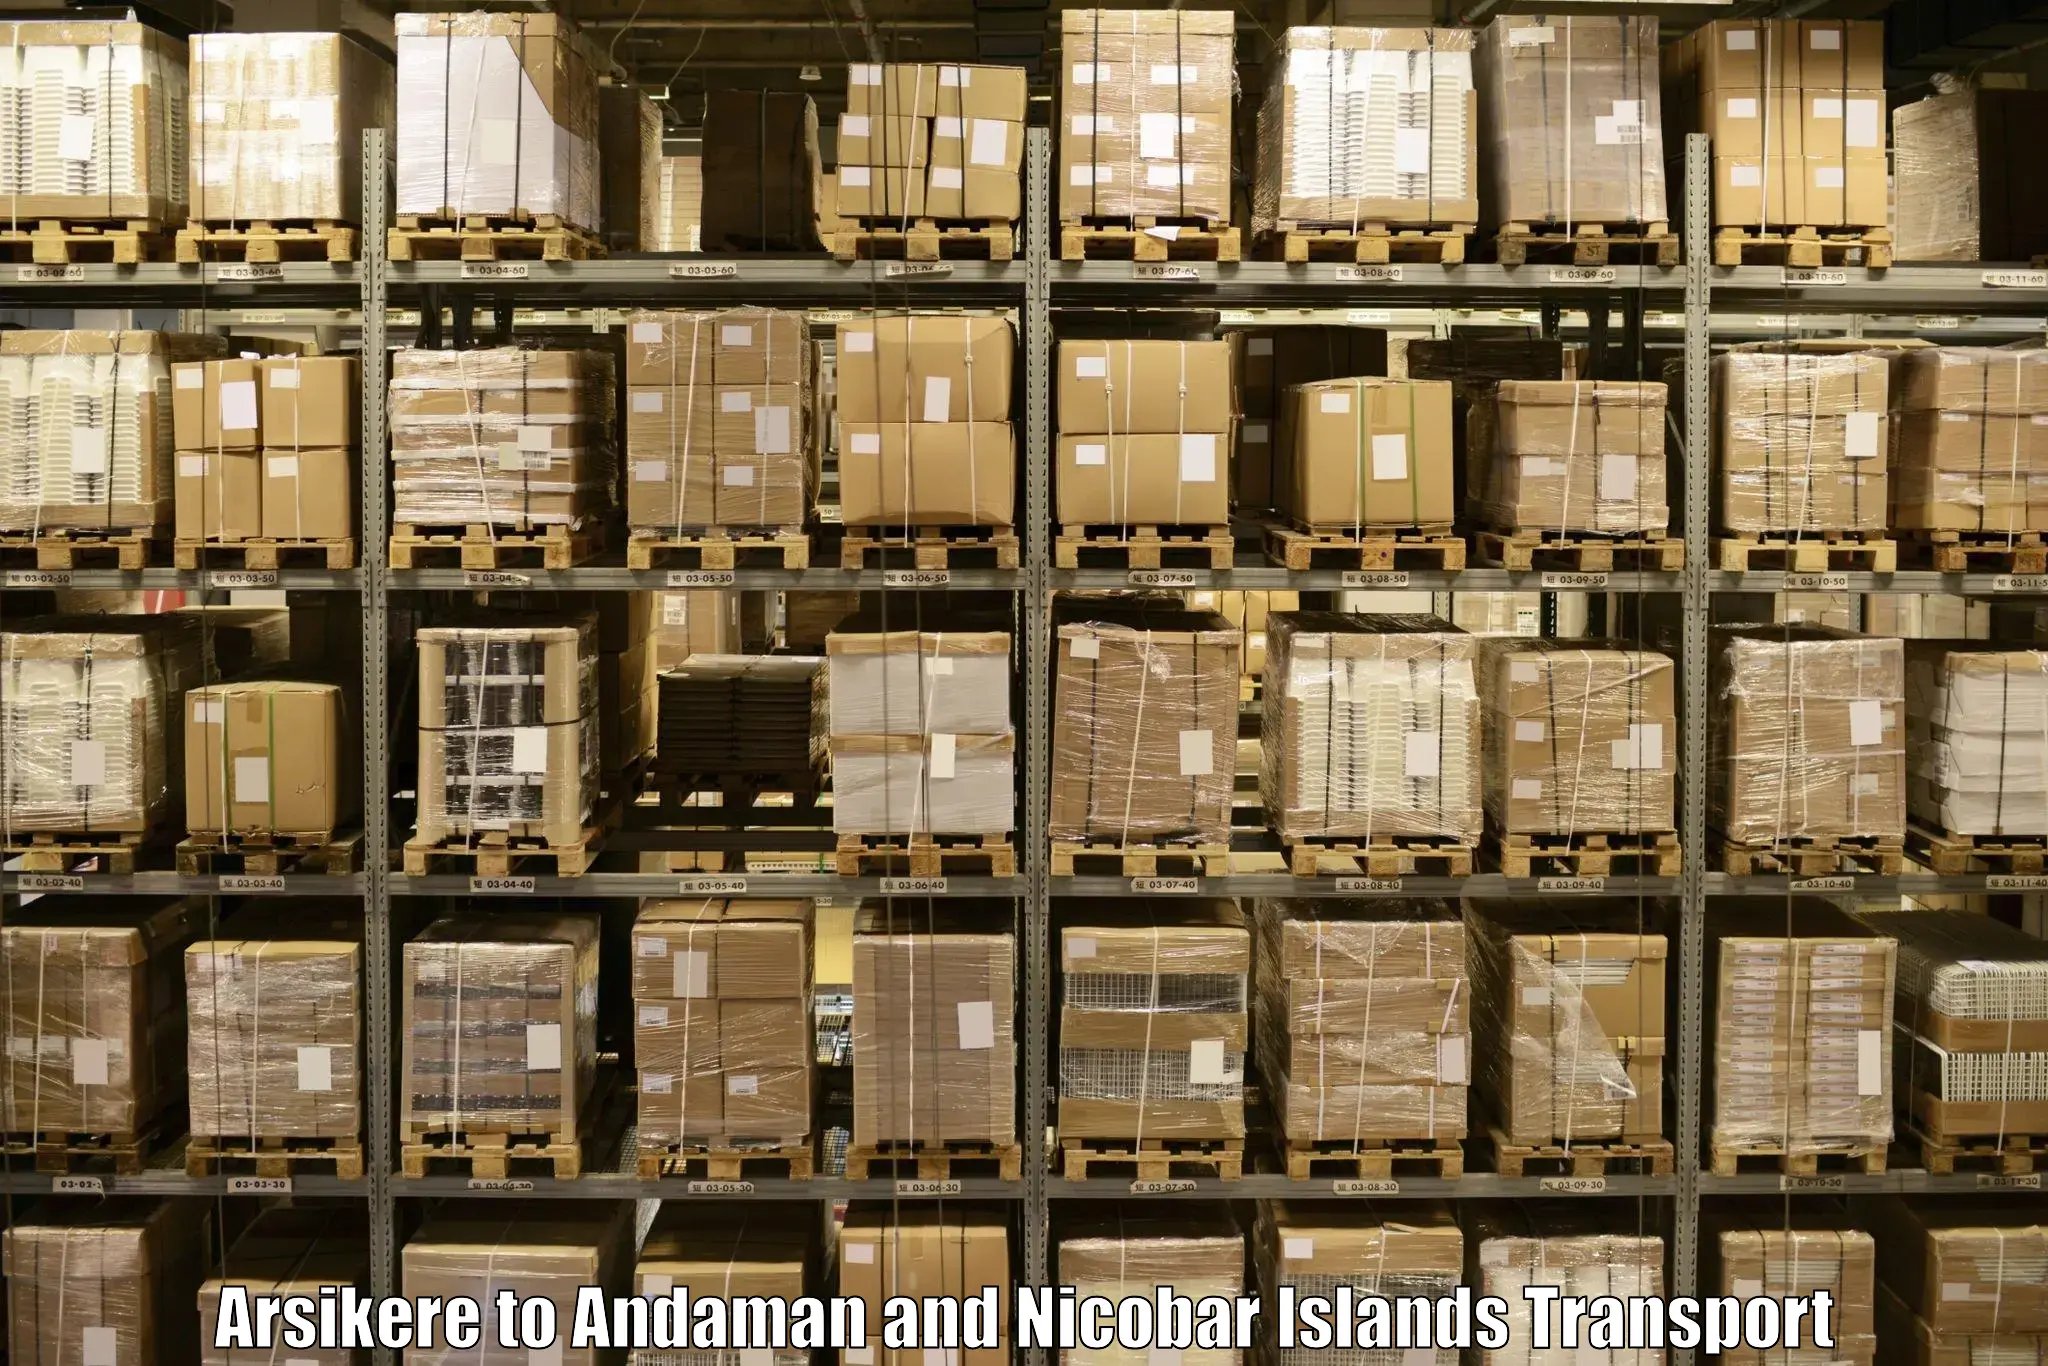 Transport in sharing Arsikere to Andaman and Nicobar Islands